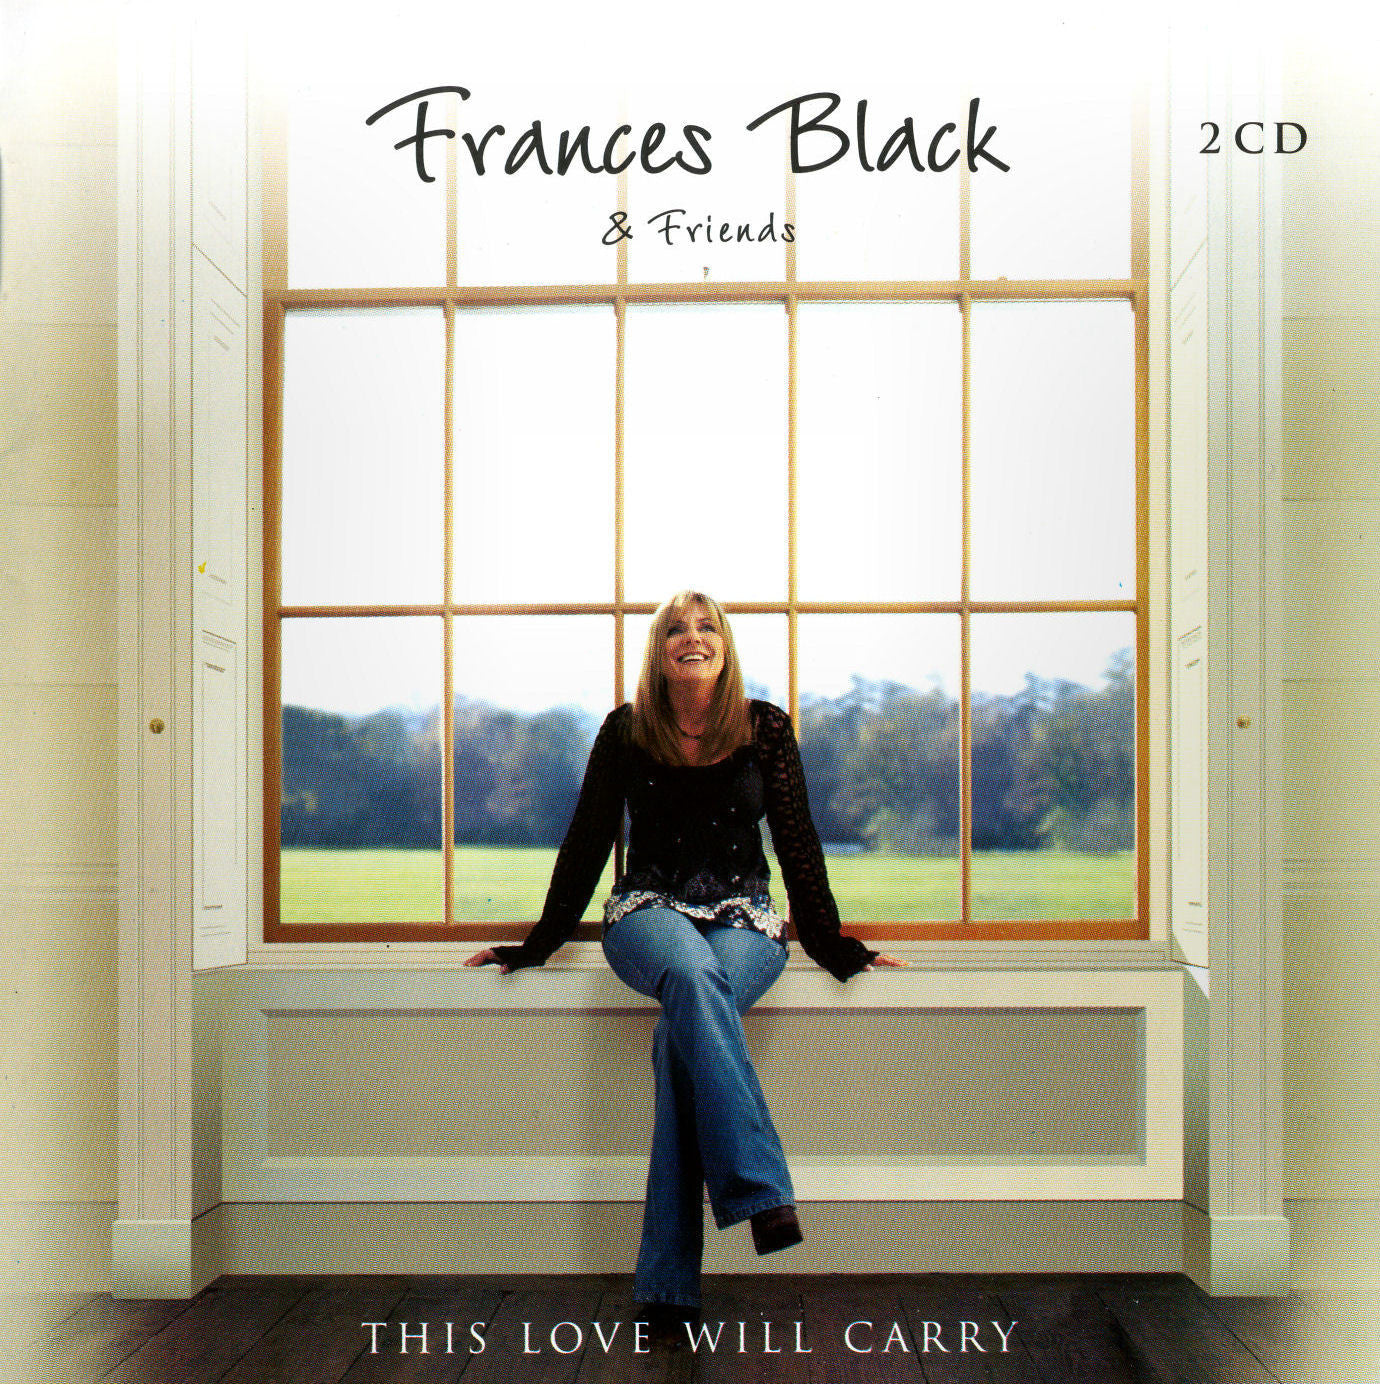 This Love Will Carry - Frances Black [2CD]